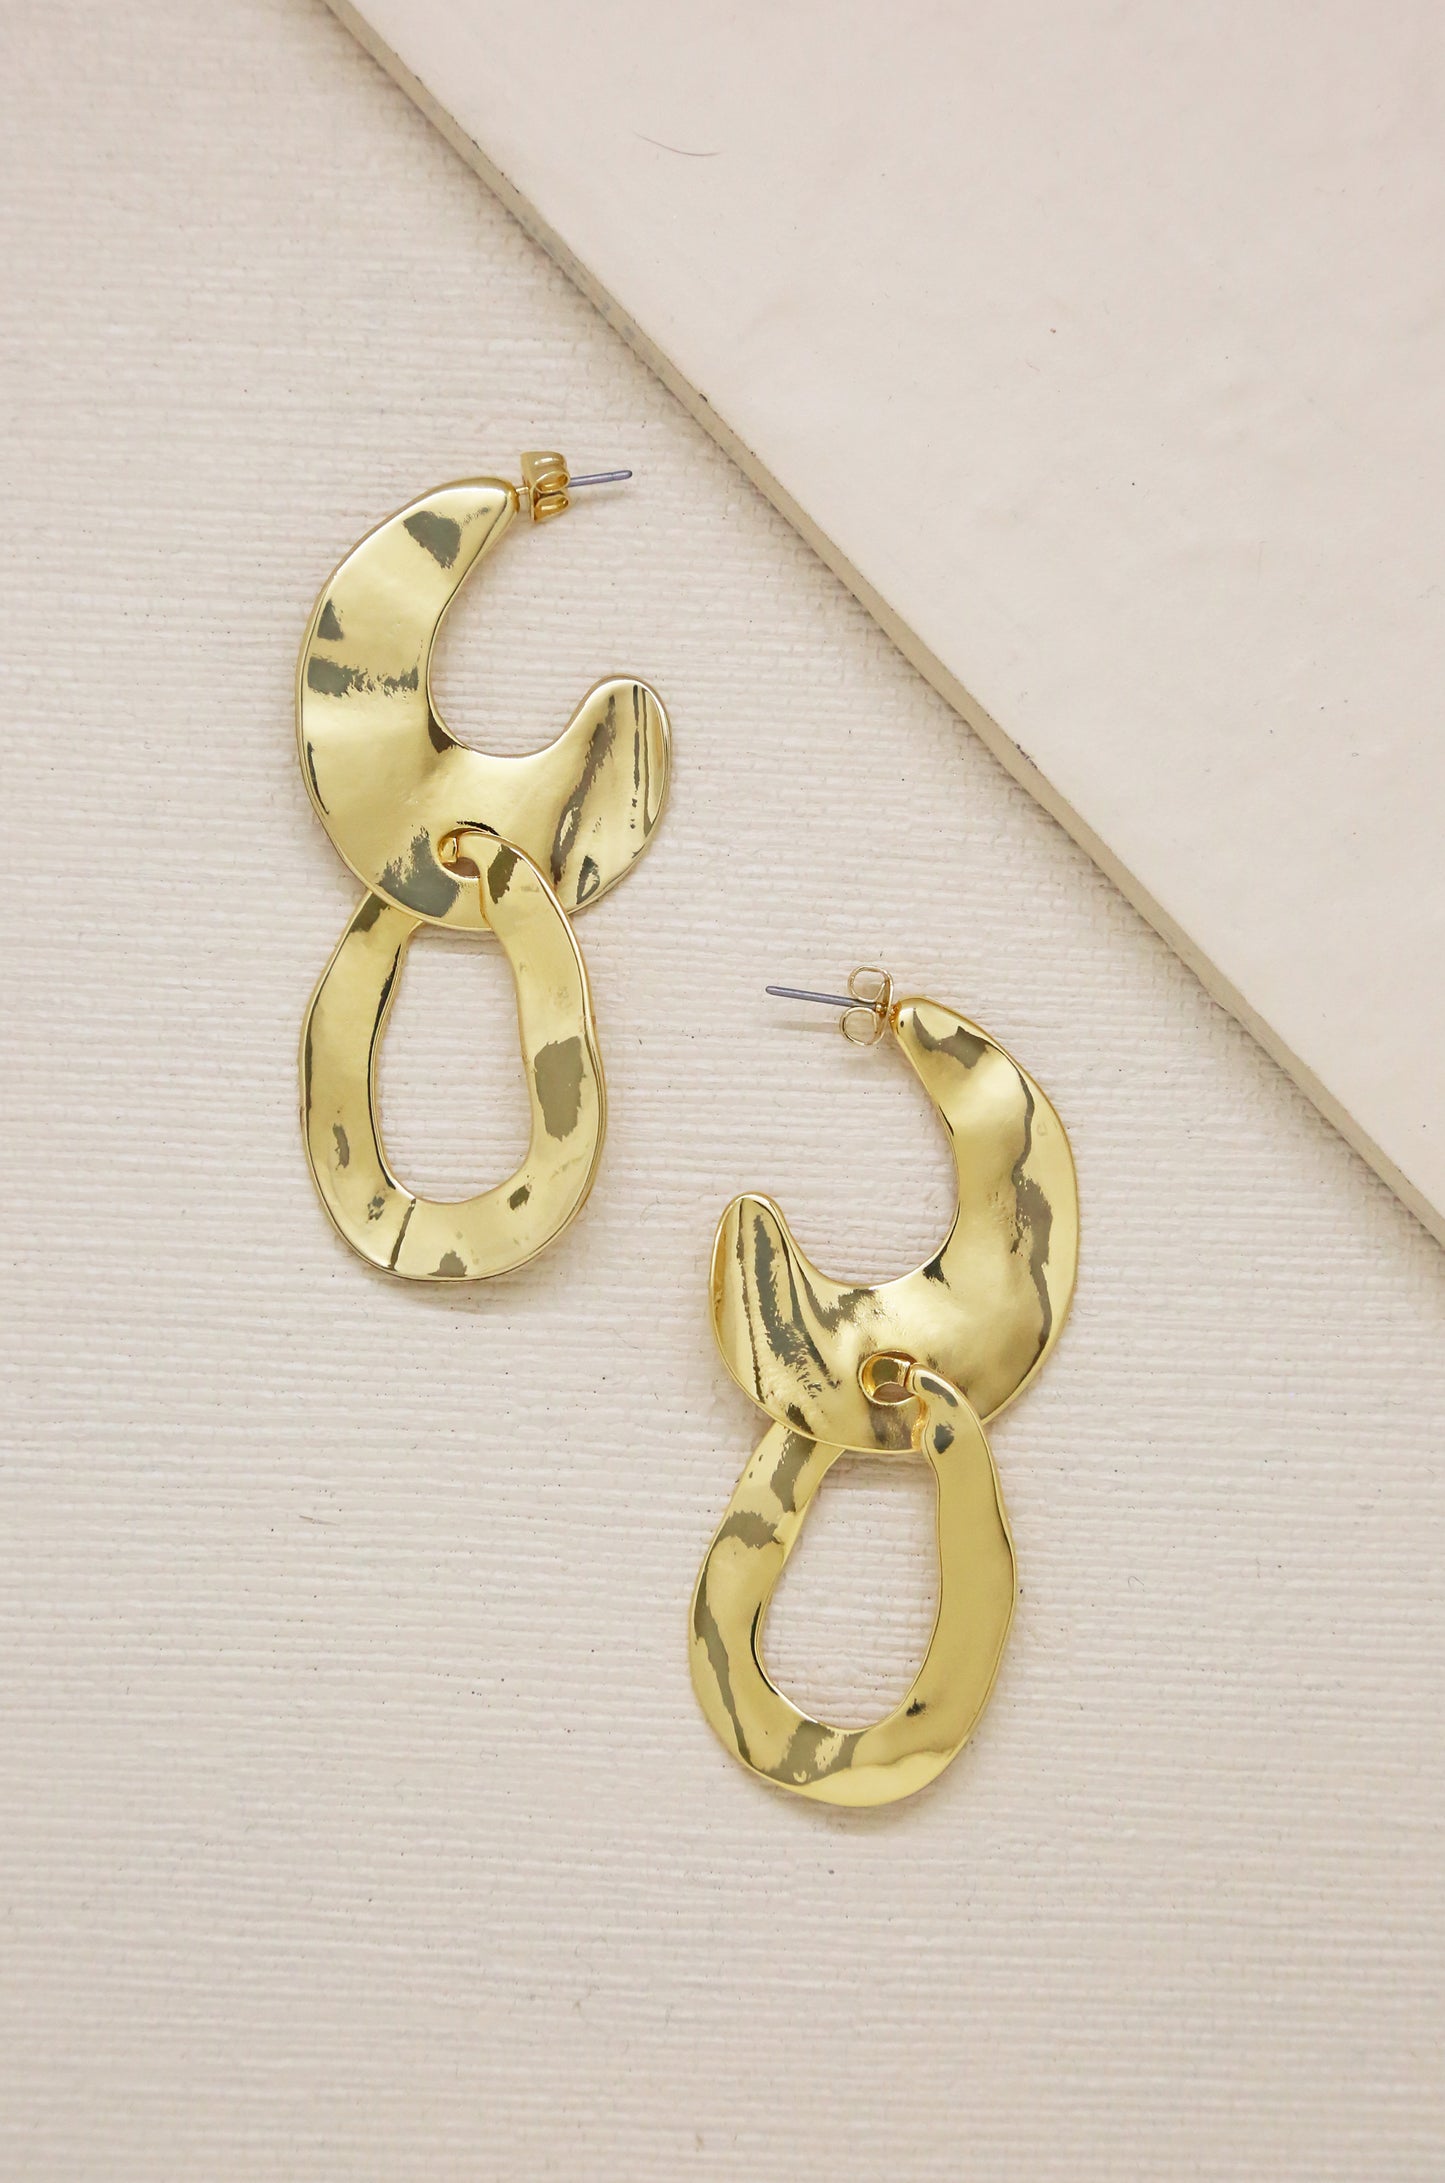 Knock Knock Abstract Double Ring 18k Gold Plated Hoop Earrings on slate background  